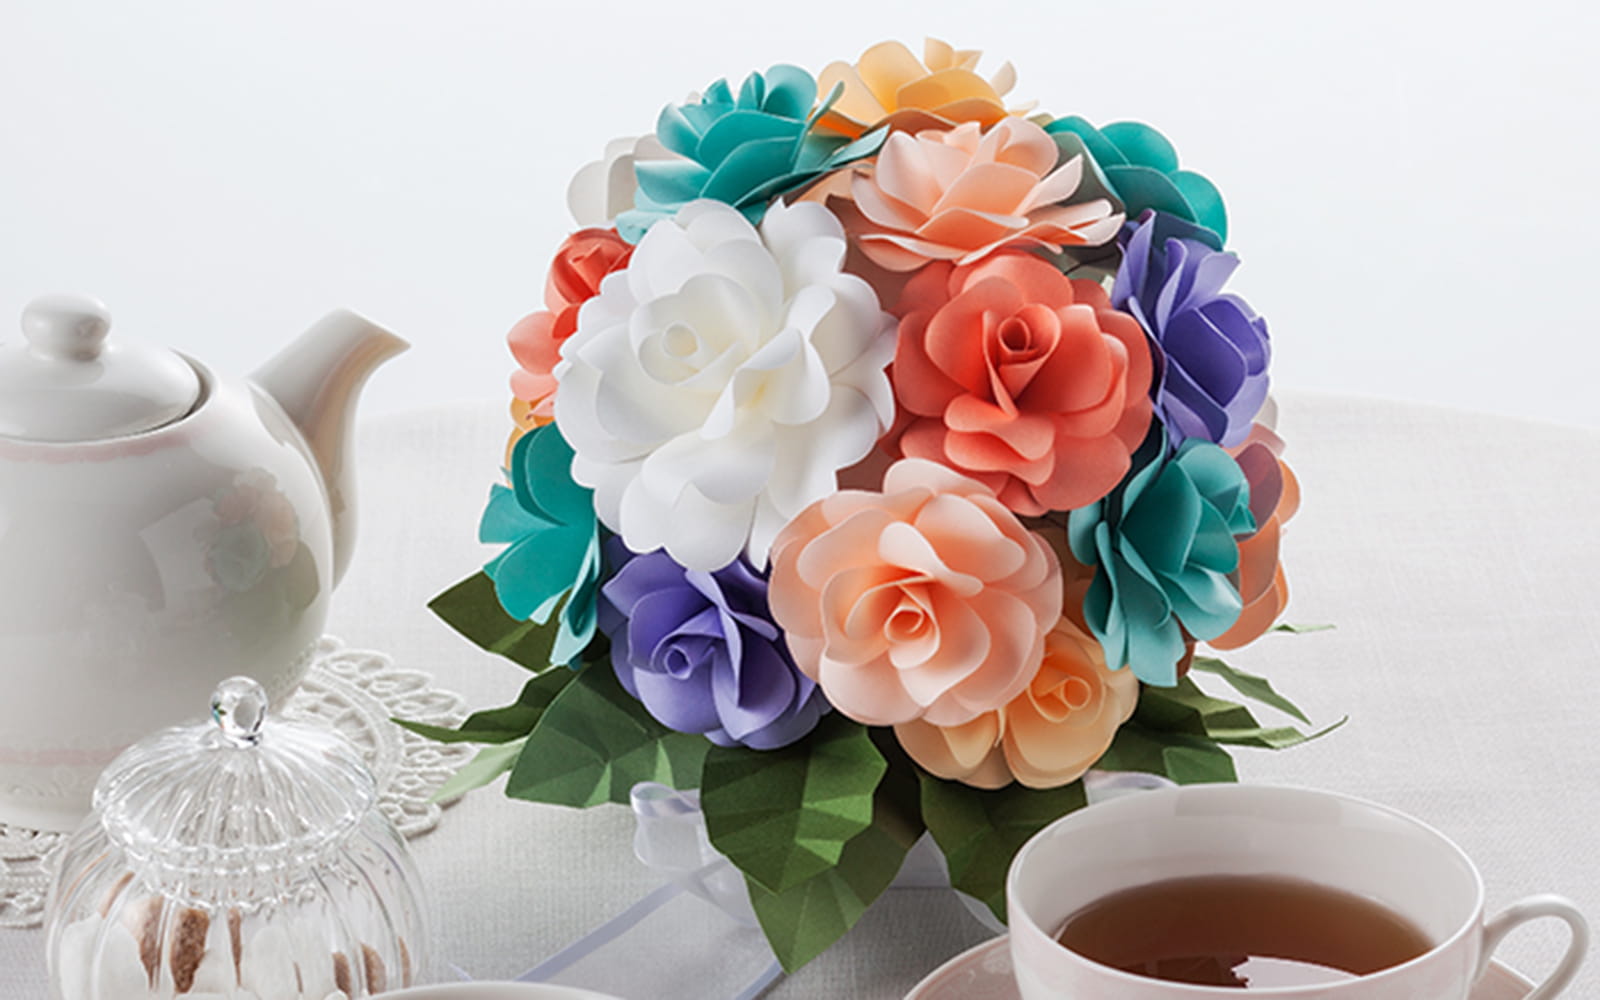 A bunch of pastel papercraft flowers on white table with tea set